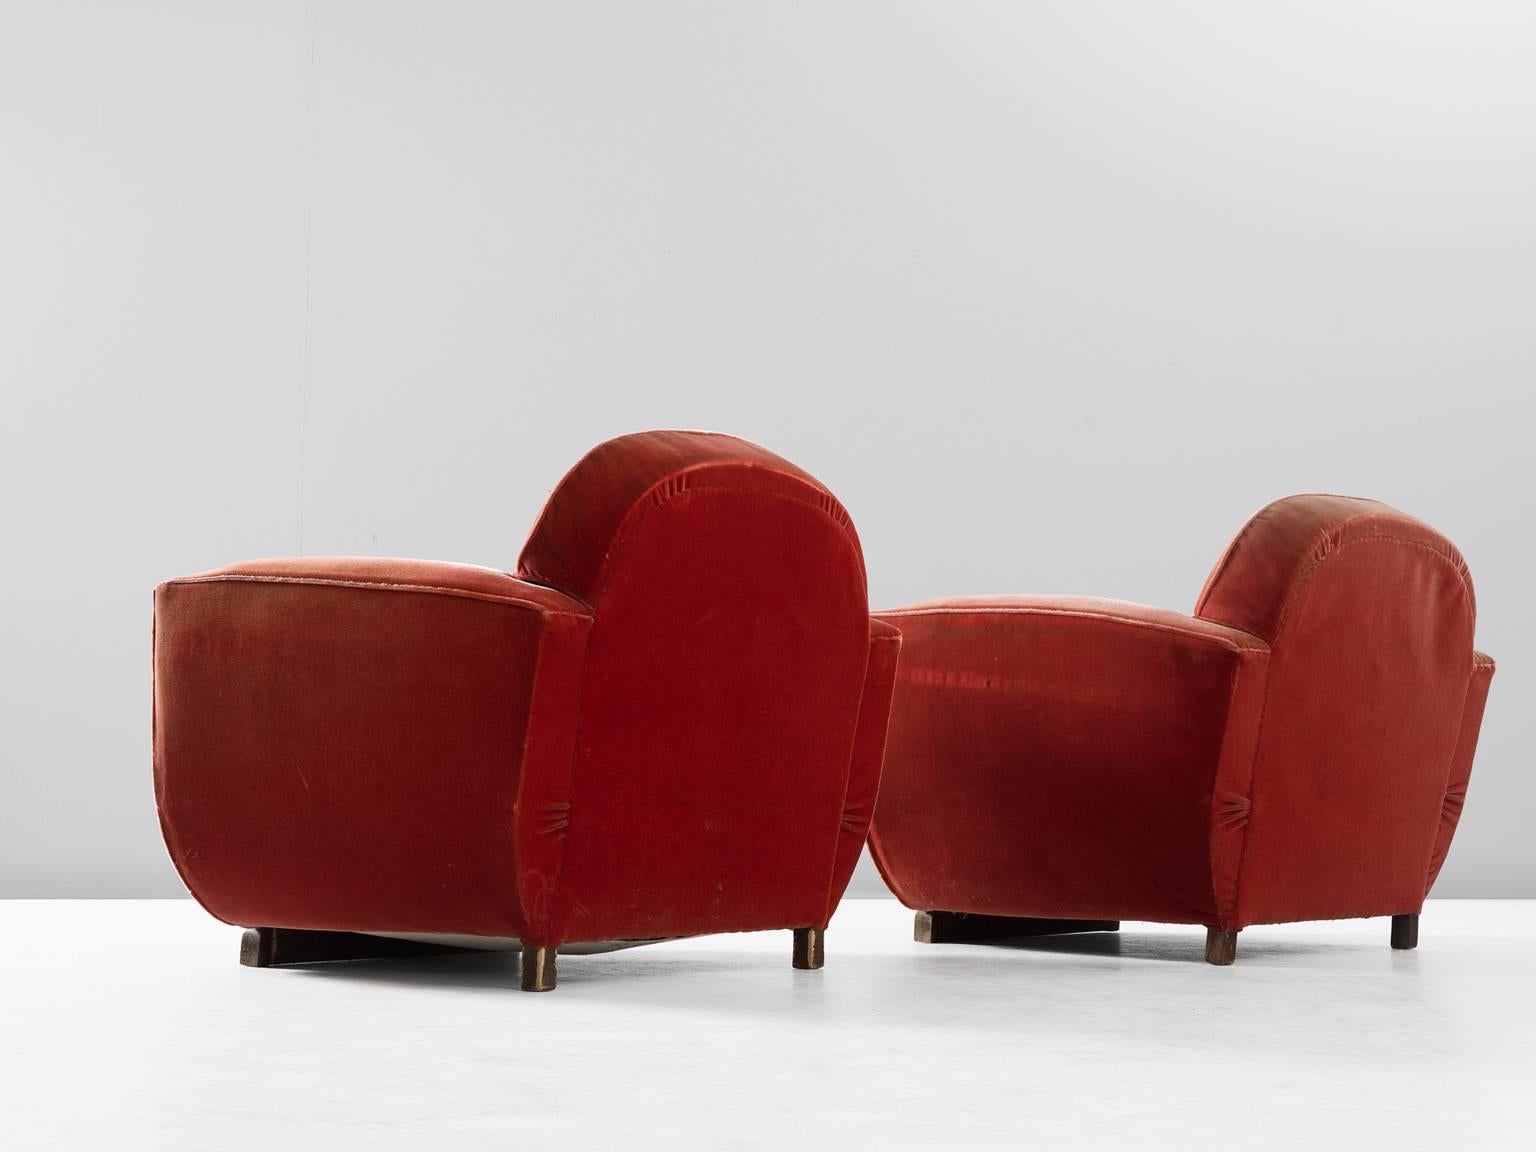 Mid-20th Century Pair of French Art Deco Club Chairs in Red Mohair Upholstery